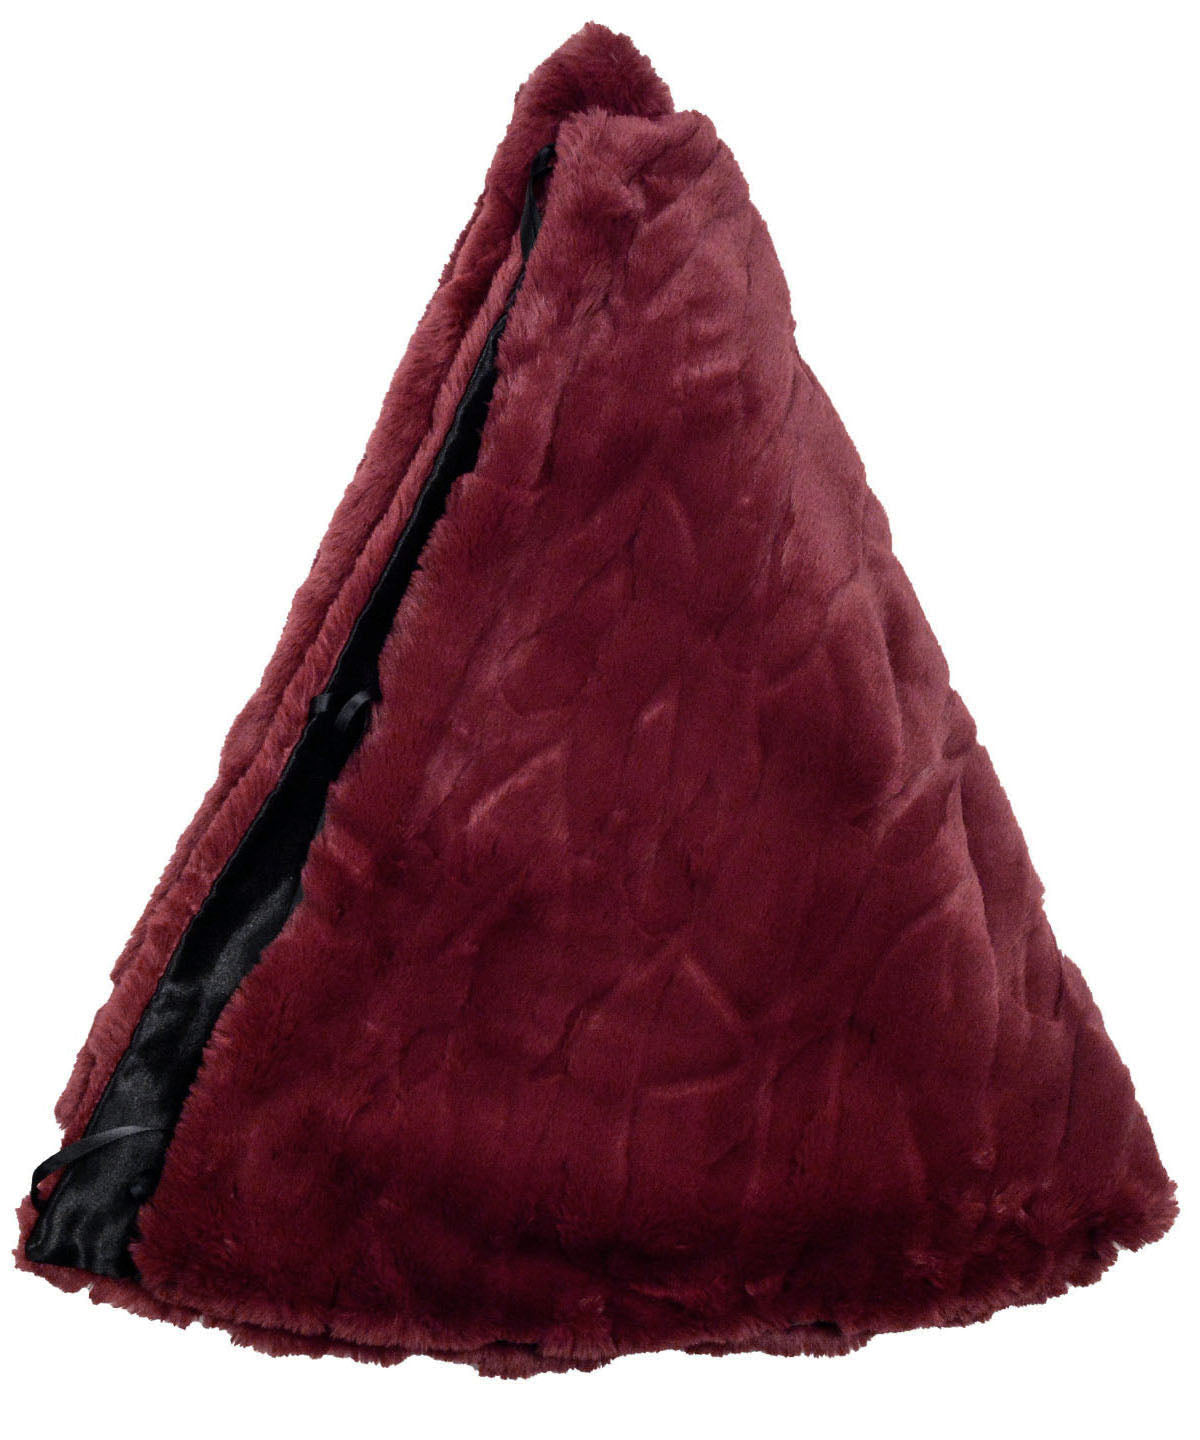 Cranberry Creek Faux Fur Tree Skirt under a lit Christmas Tree with gifts. Made in Seattle, WA, USA. Pandemonium Seattle.